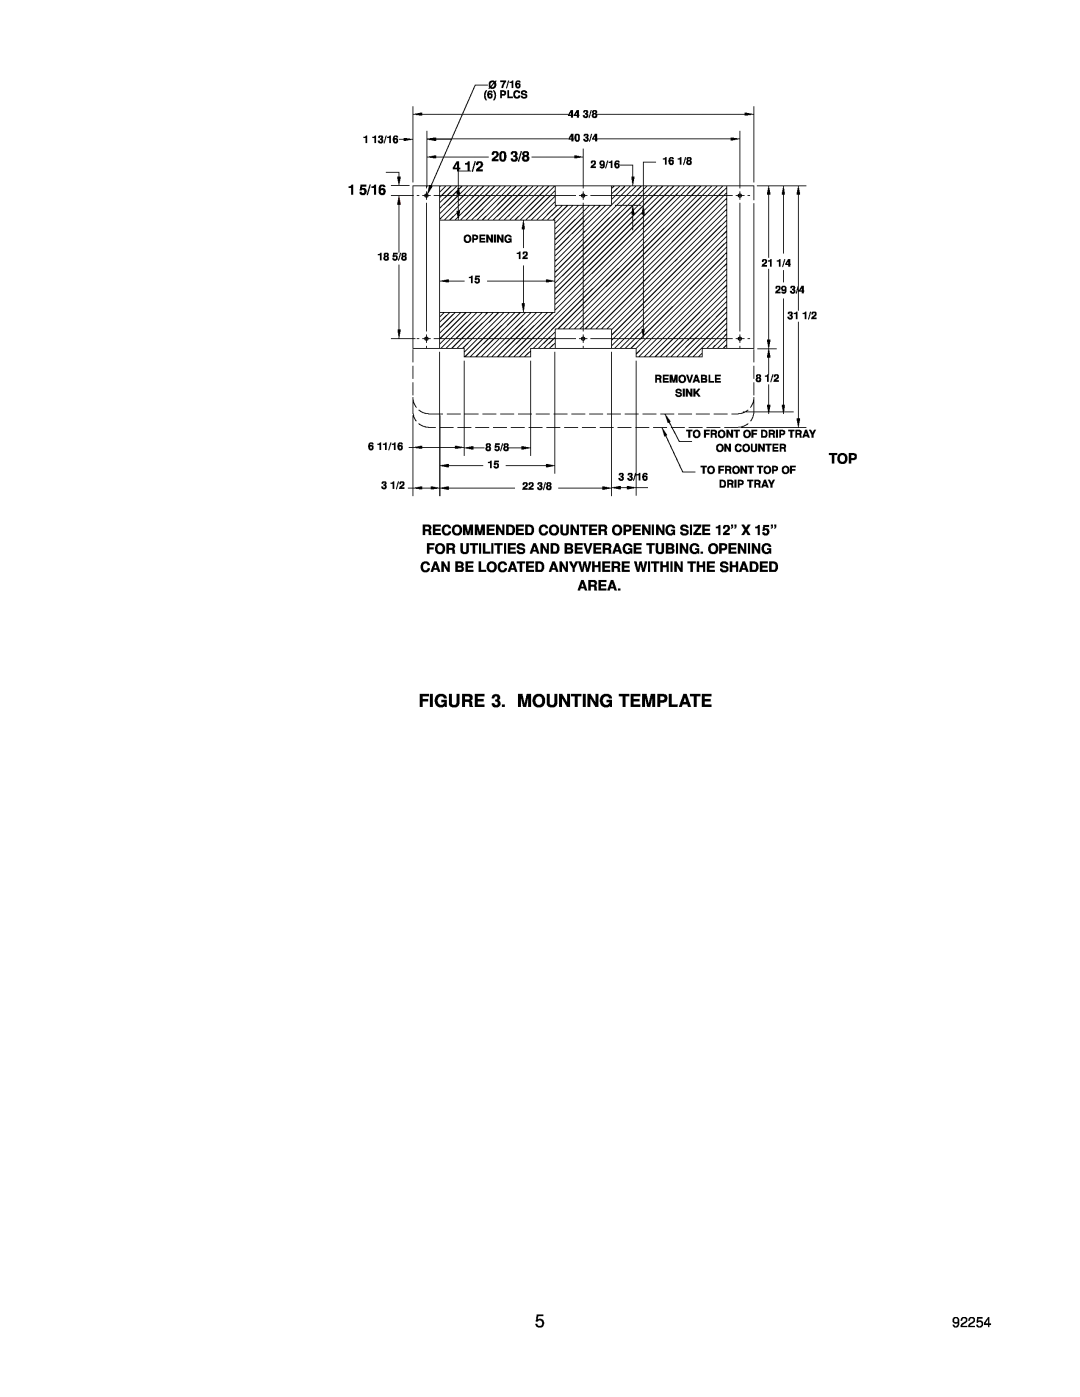 Cornelius 29505, 08027, 08030 Mounting Template, 20 3/8, 4 1/2, RECOMMENDED COUNTER OPENING SIZE 12” X 15”, 92254, 1 5/16 